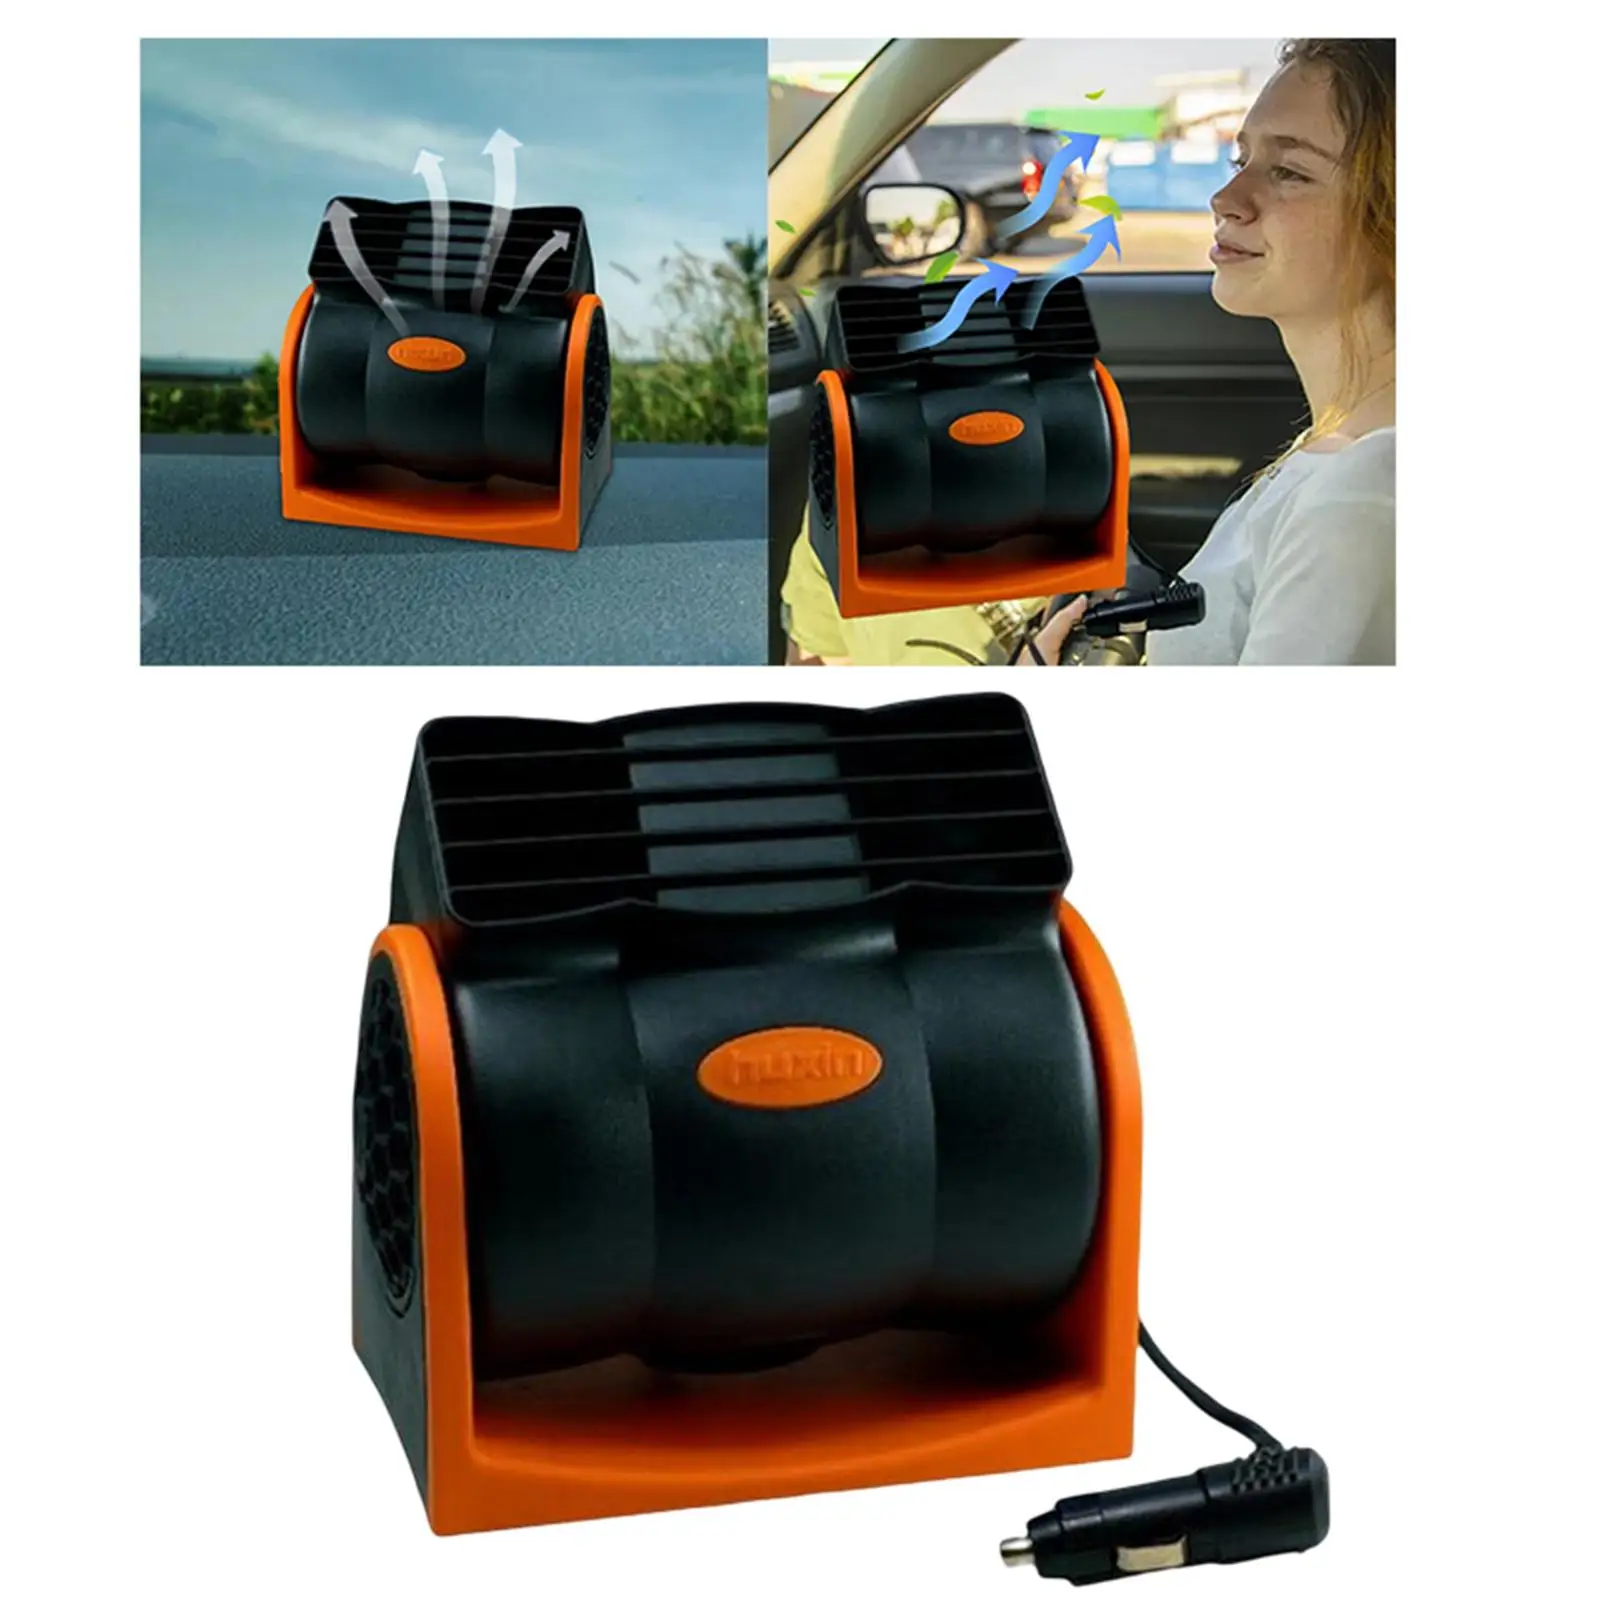 24V Car Truck Cooling Air Fan 2 Speeds Child Safety Design Premium Easy to Carry